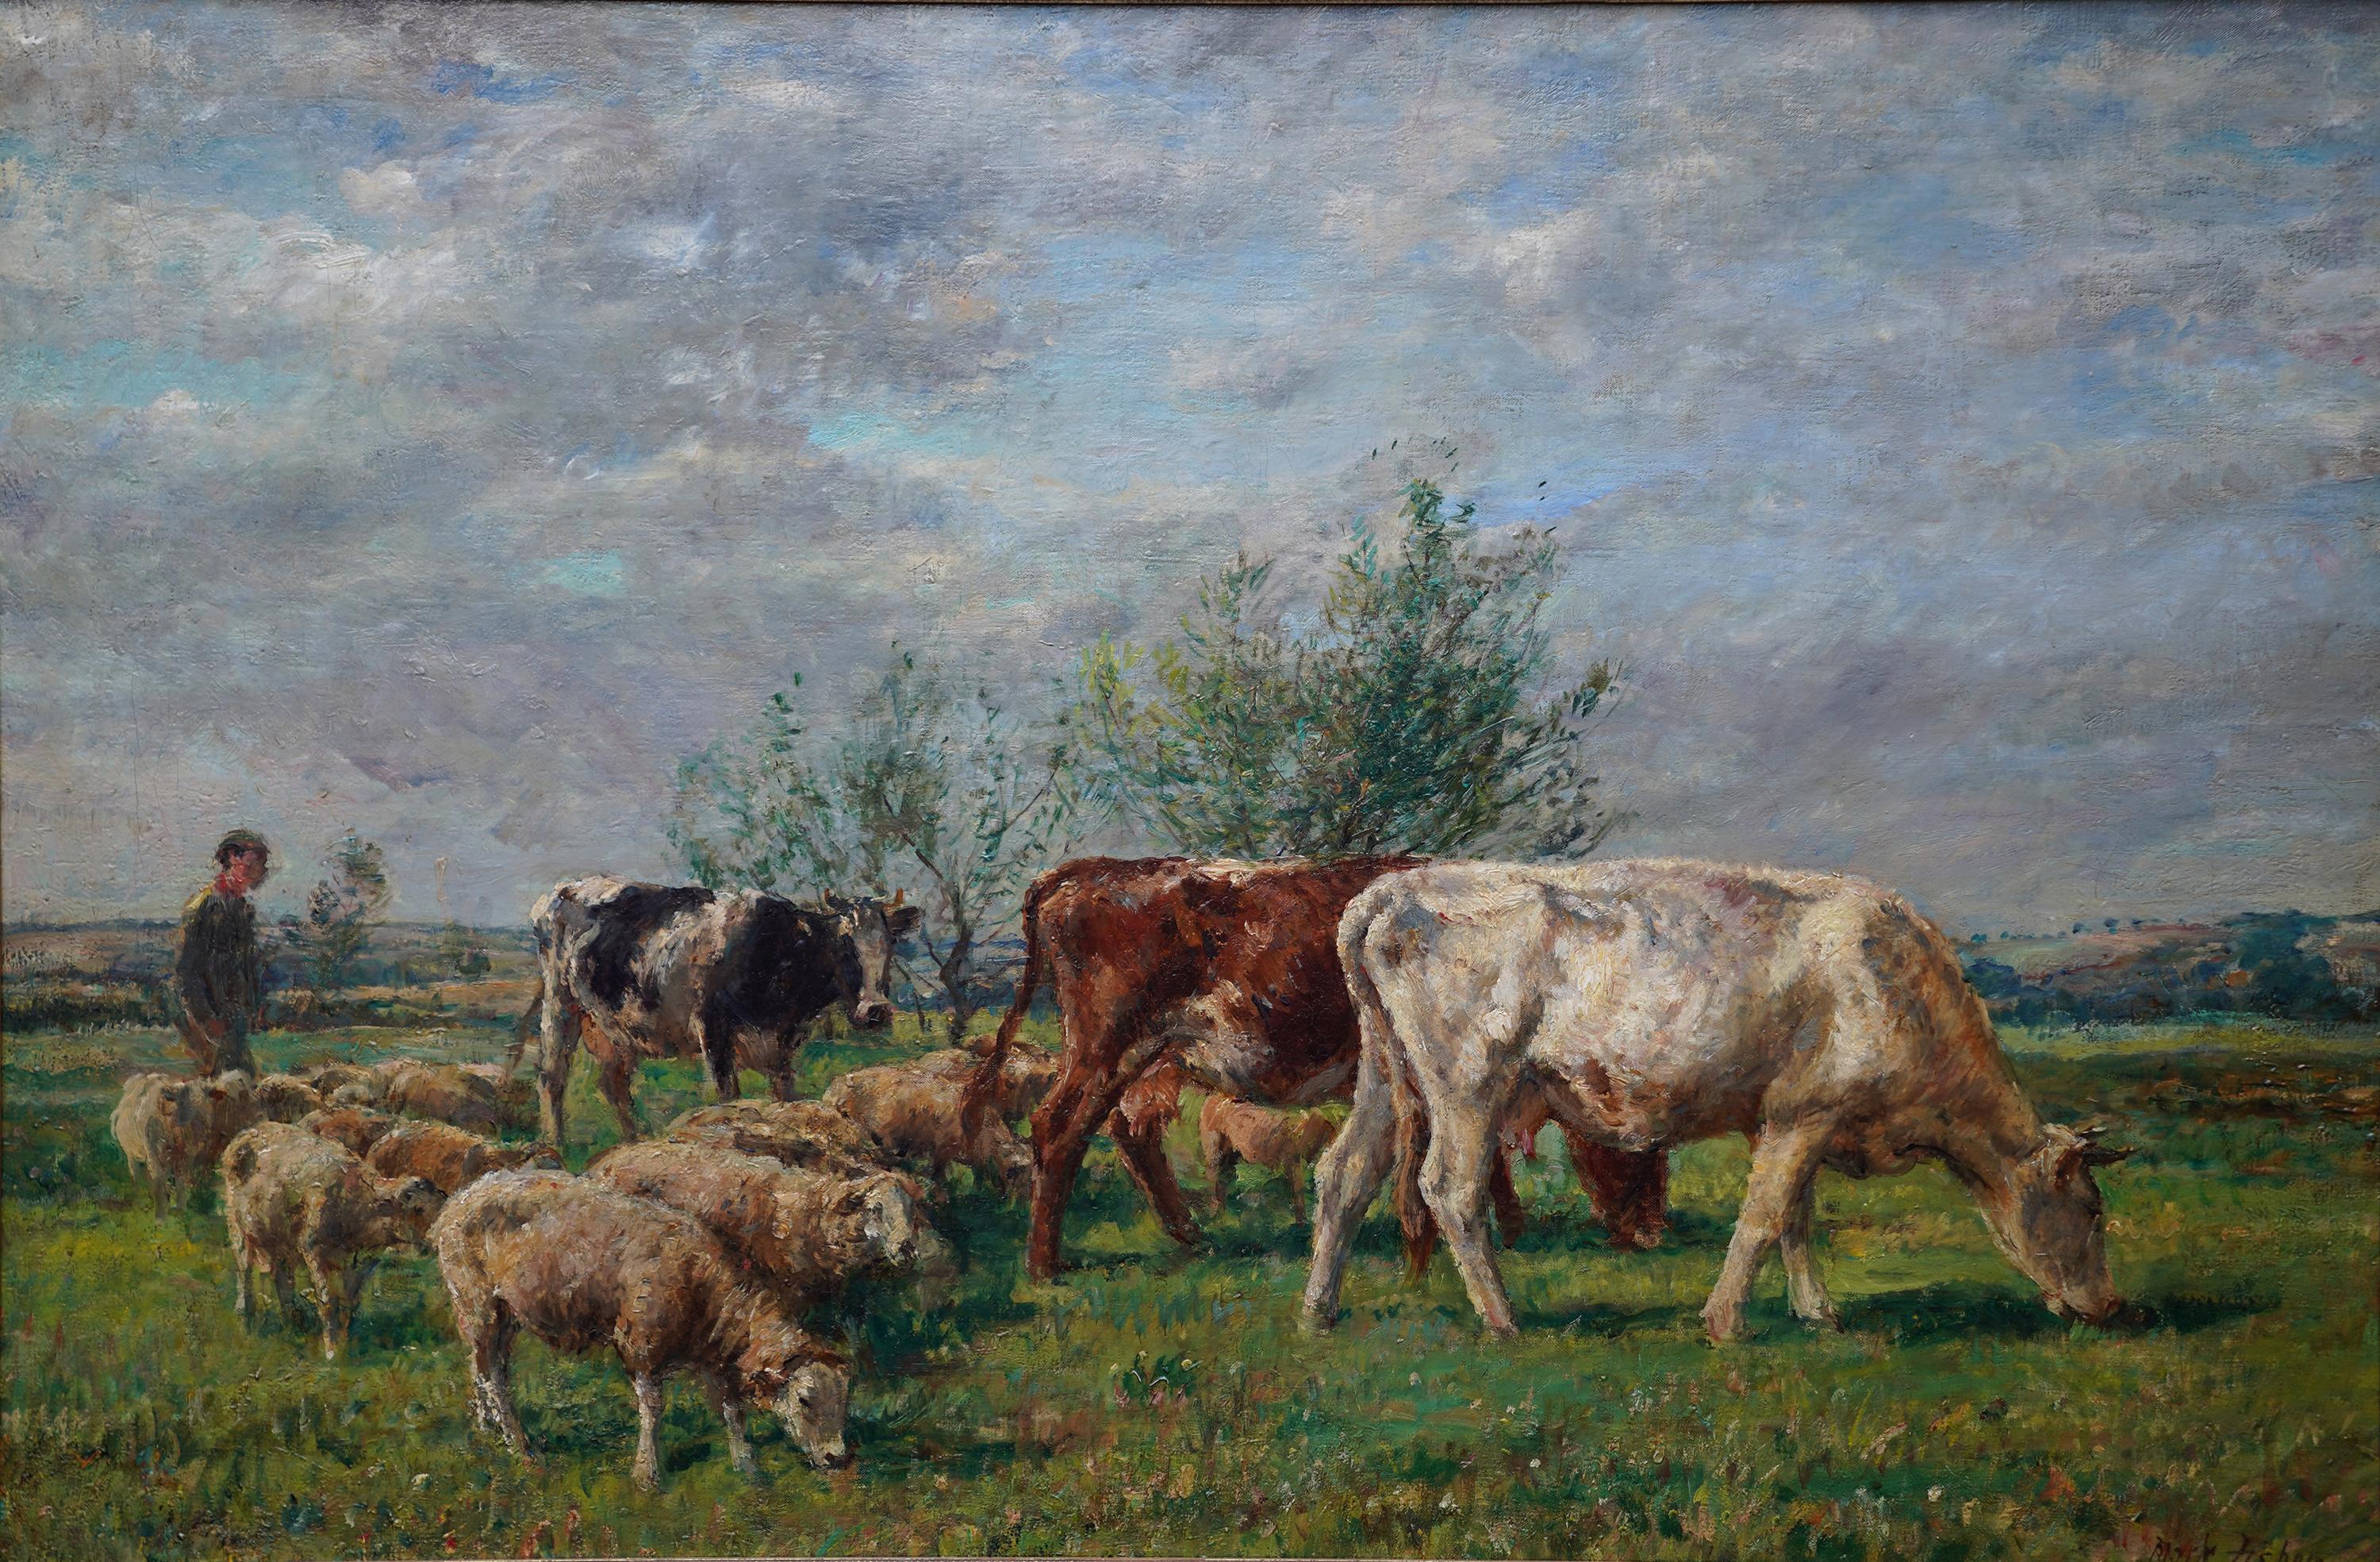 Landscape with Cattle and Sheep - British Victorian art Pastoral oil painting - Painting by William Mark Fisher